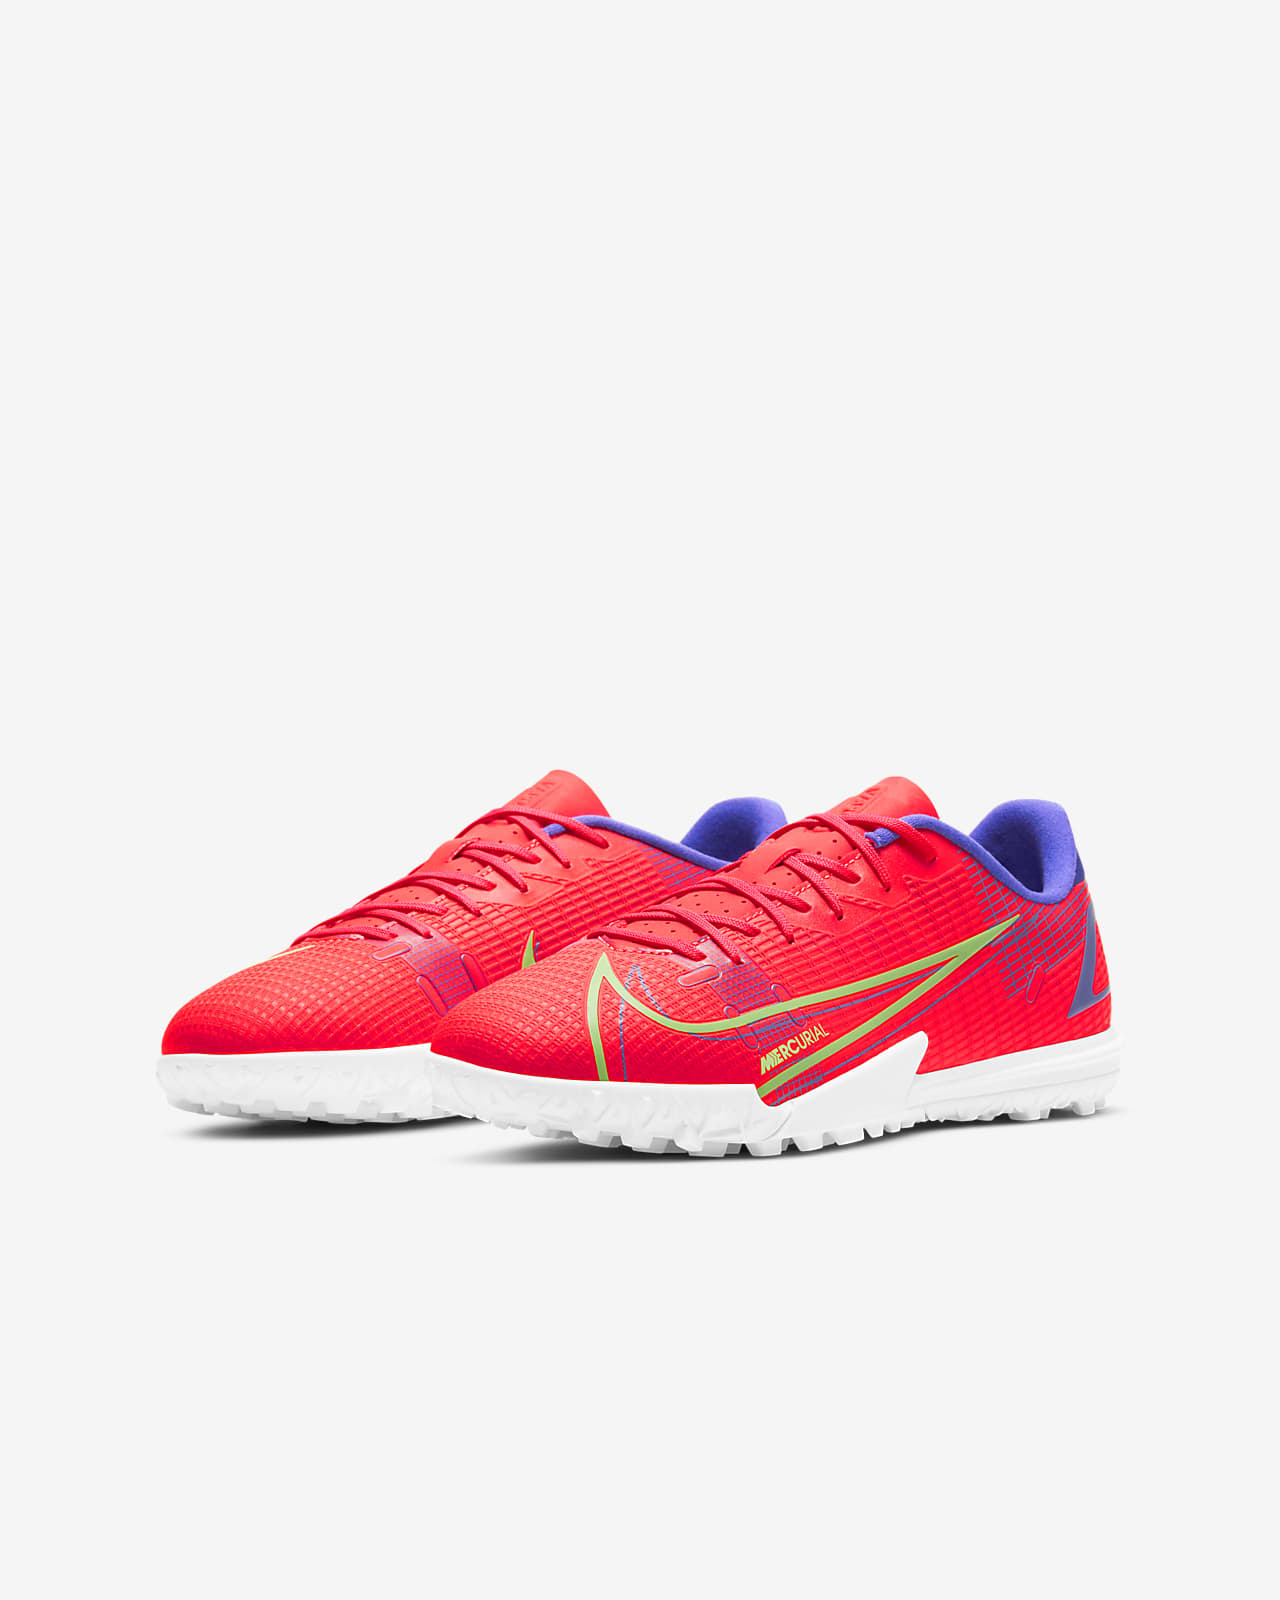 nike youth turf soccer shoes